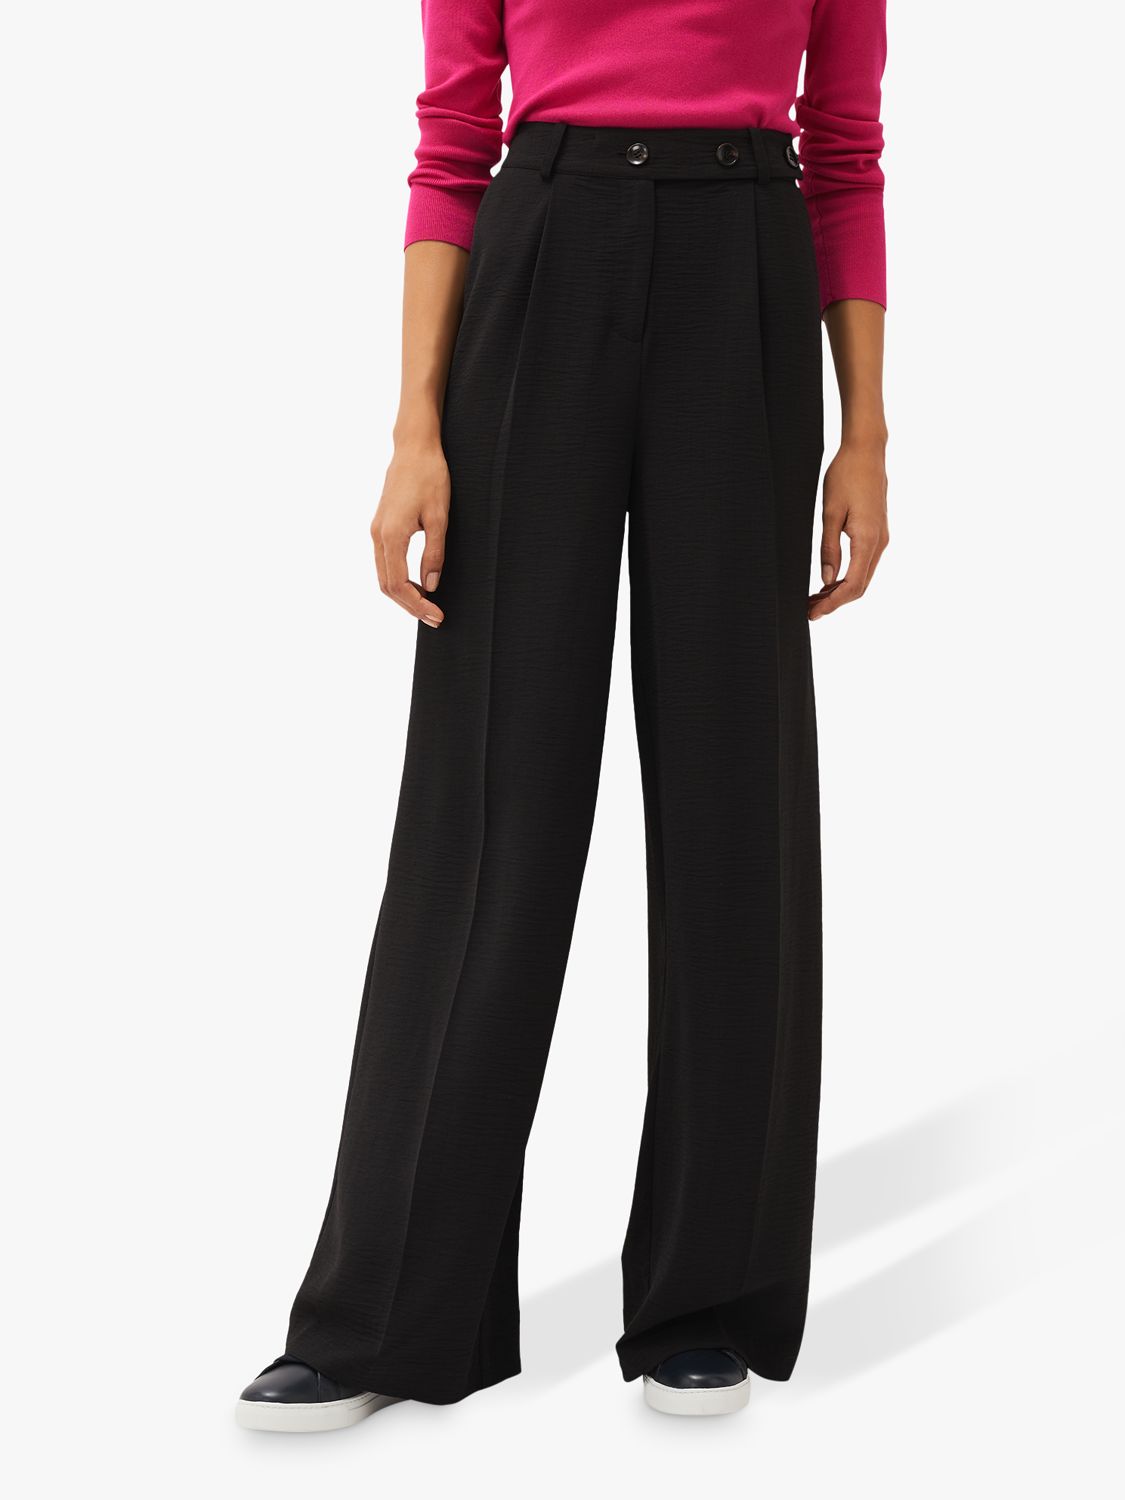 Phase Eight Opal Wide Leg Tailored Trousers, Black, 8